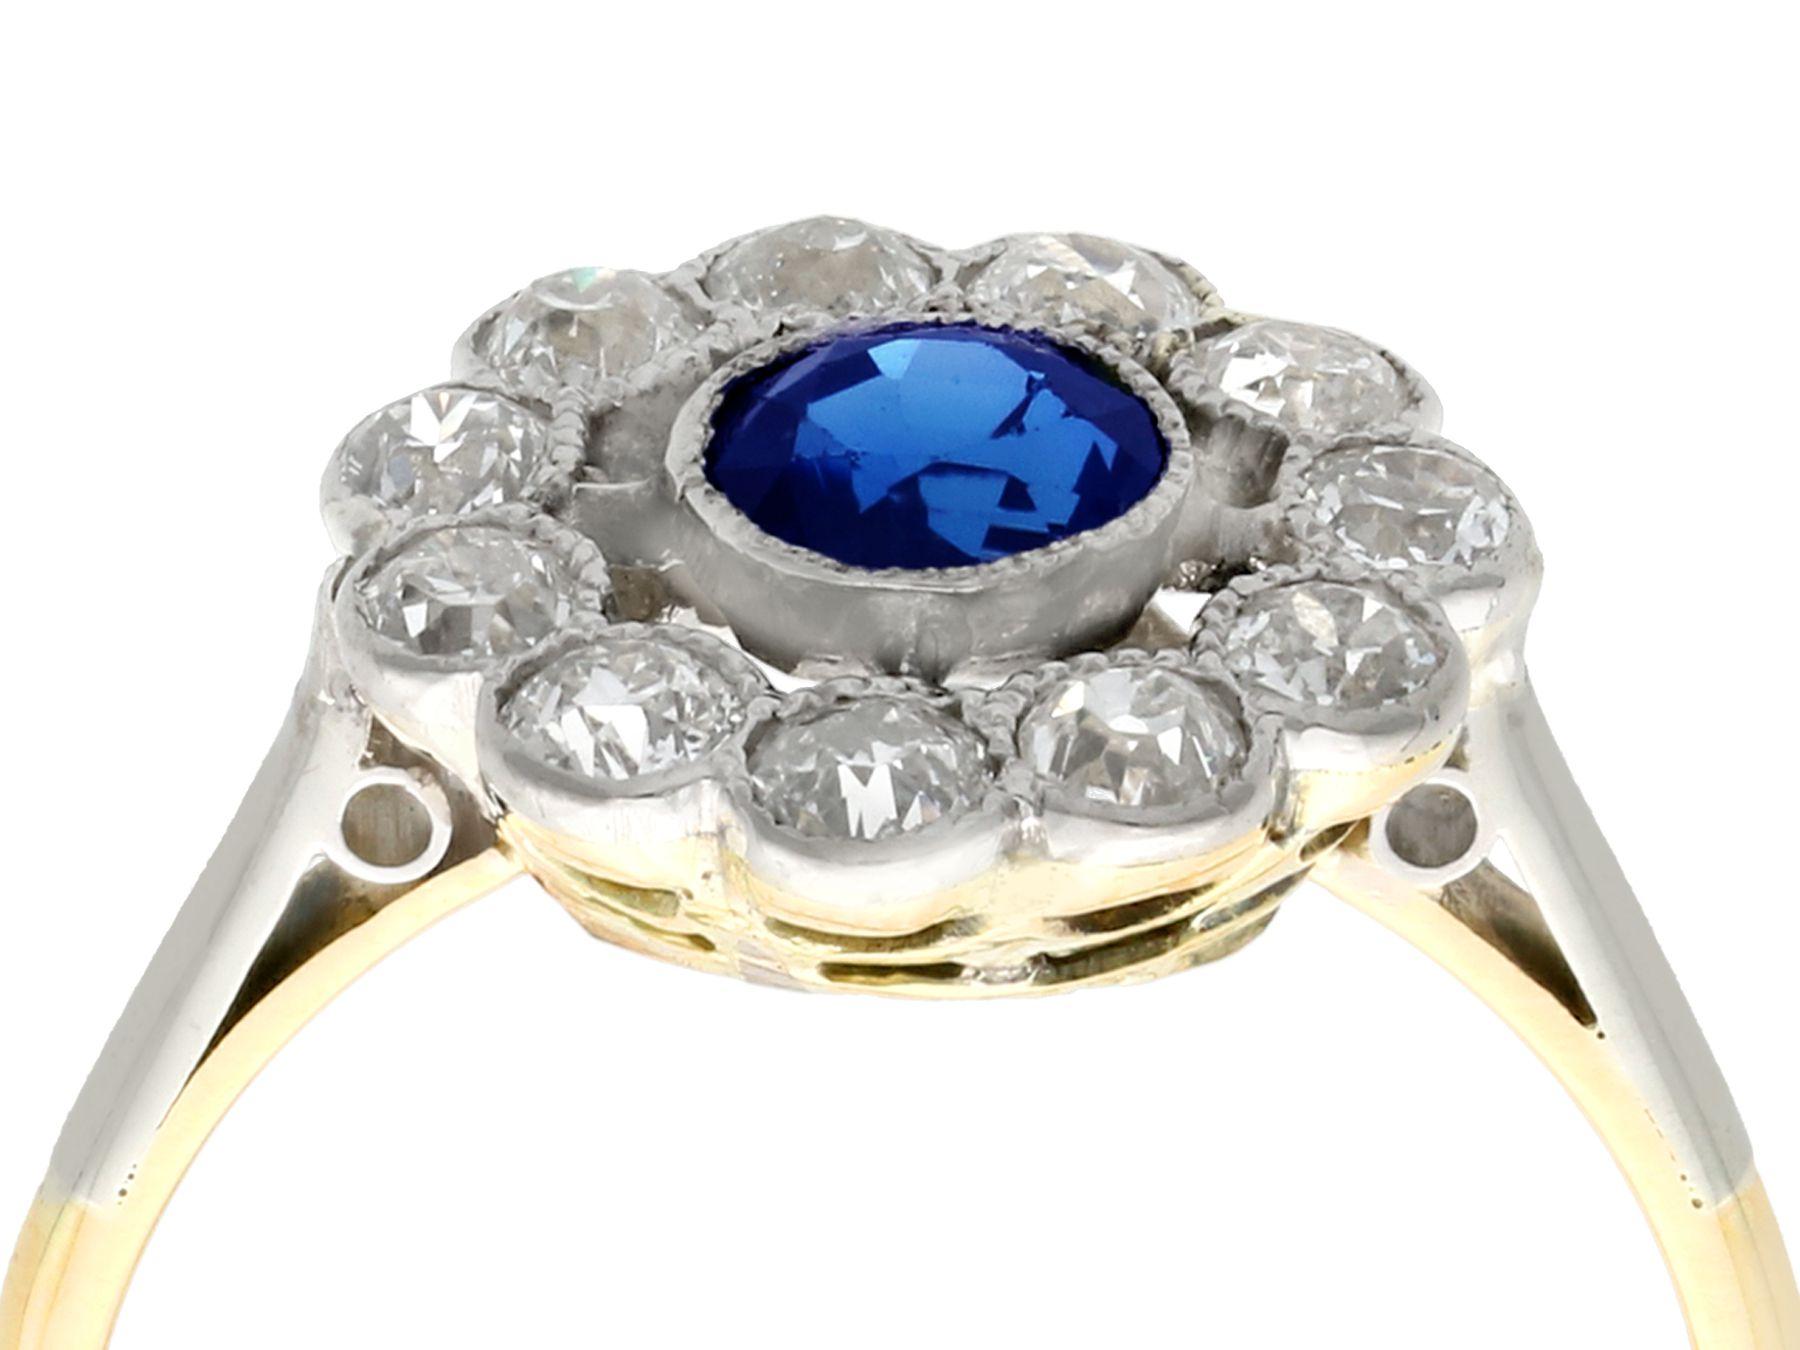 An impressive antique 0.68 Ct sapphire and 0.65 carat diamond, 18k yellow gold and white gold set cluster ring; part of our diverse antique jewelry and estate jewelry collections.

This fine and impressive 1930s sapphire and diamond ring has been